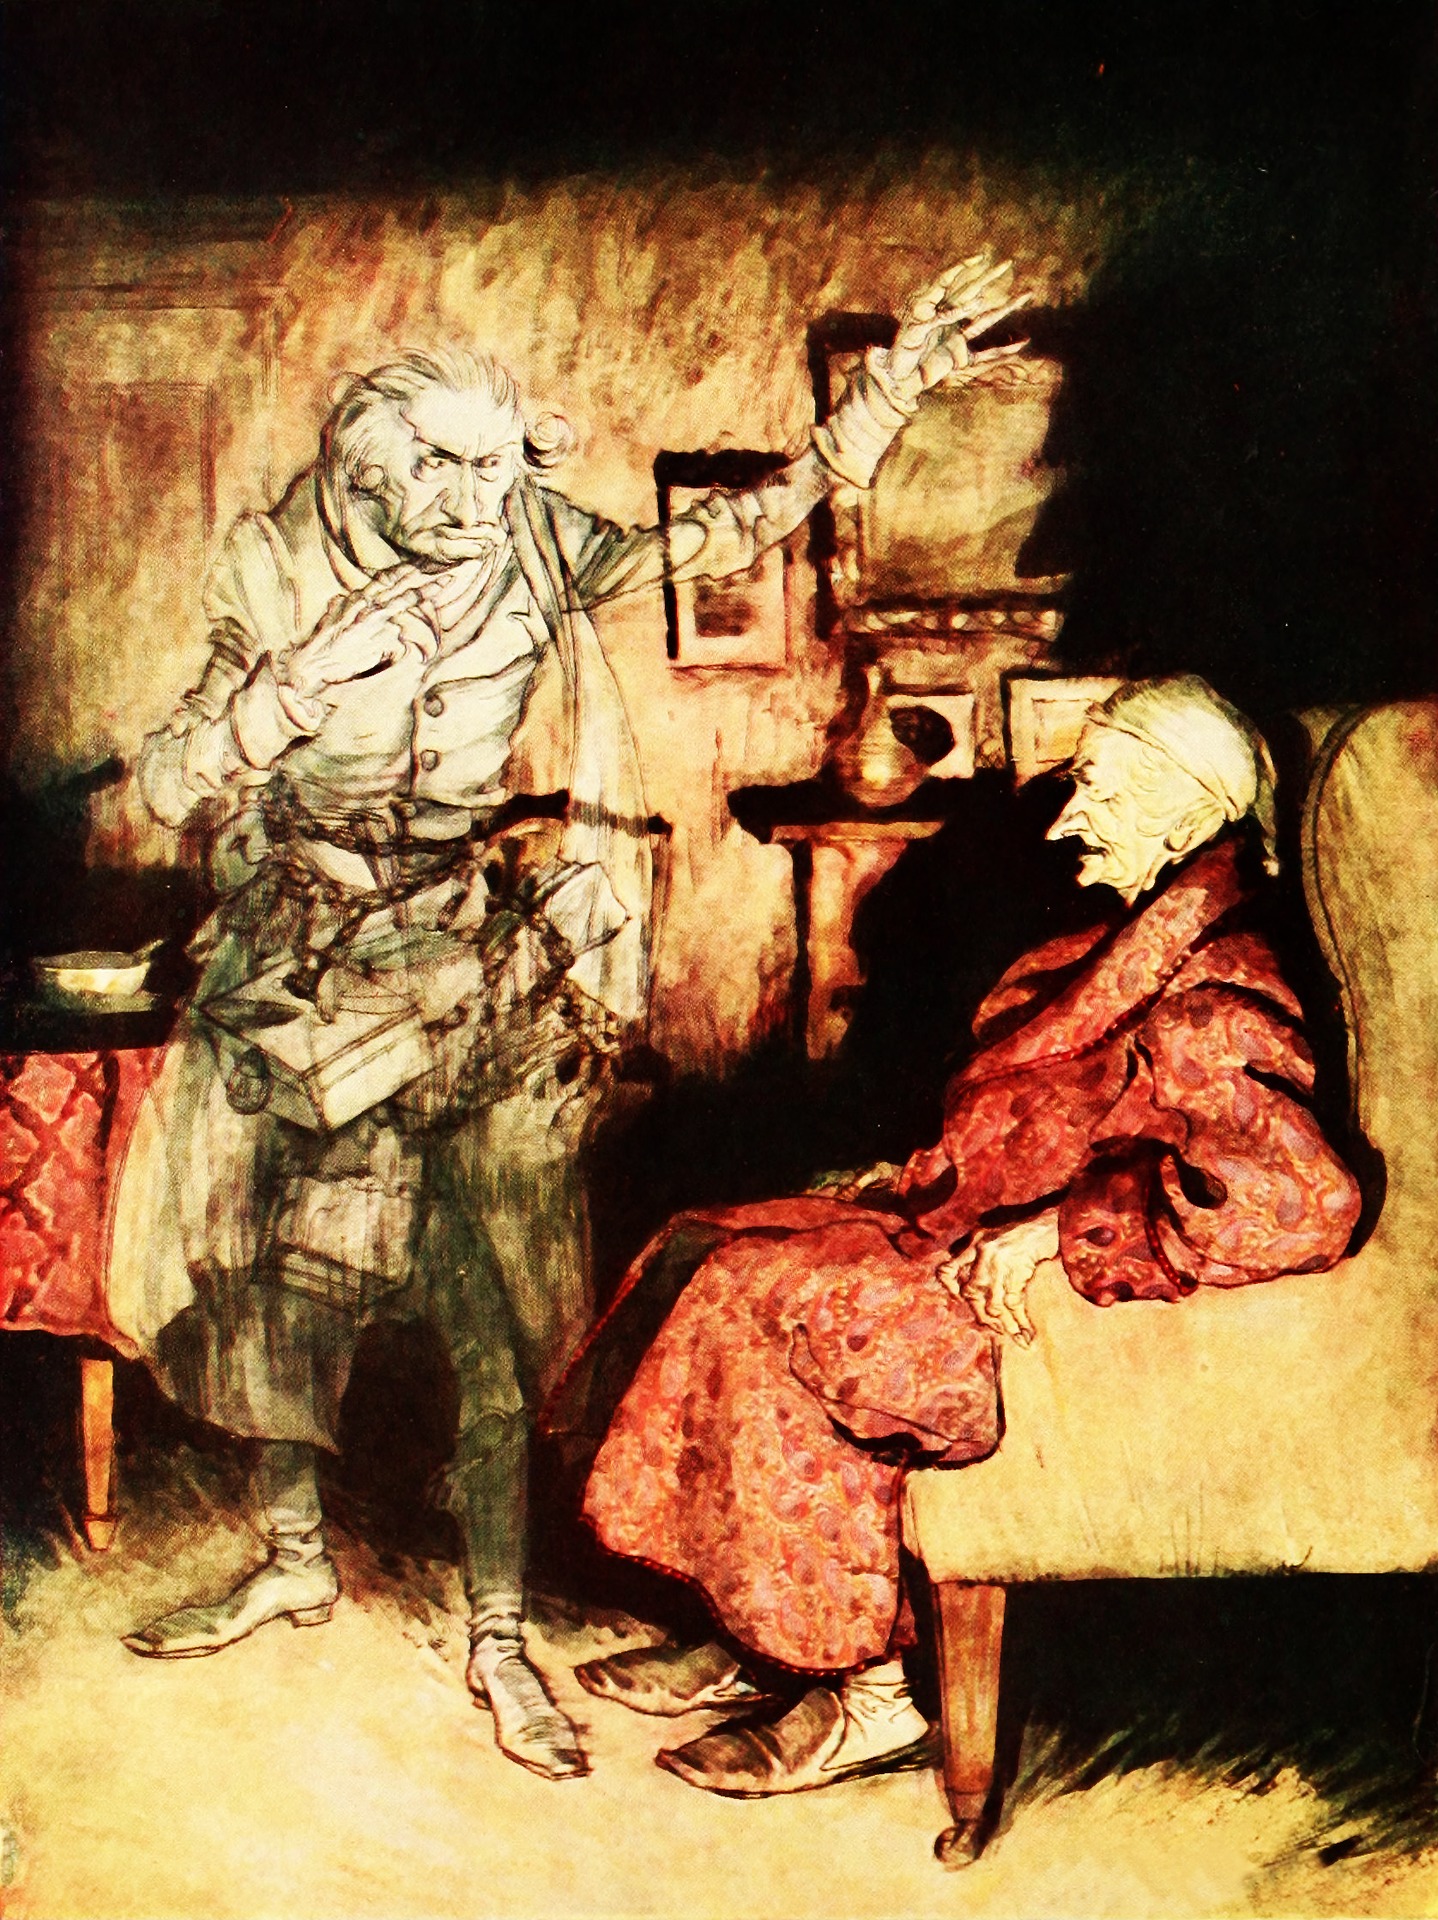 An illustration from the Christmas Carol book 